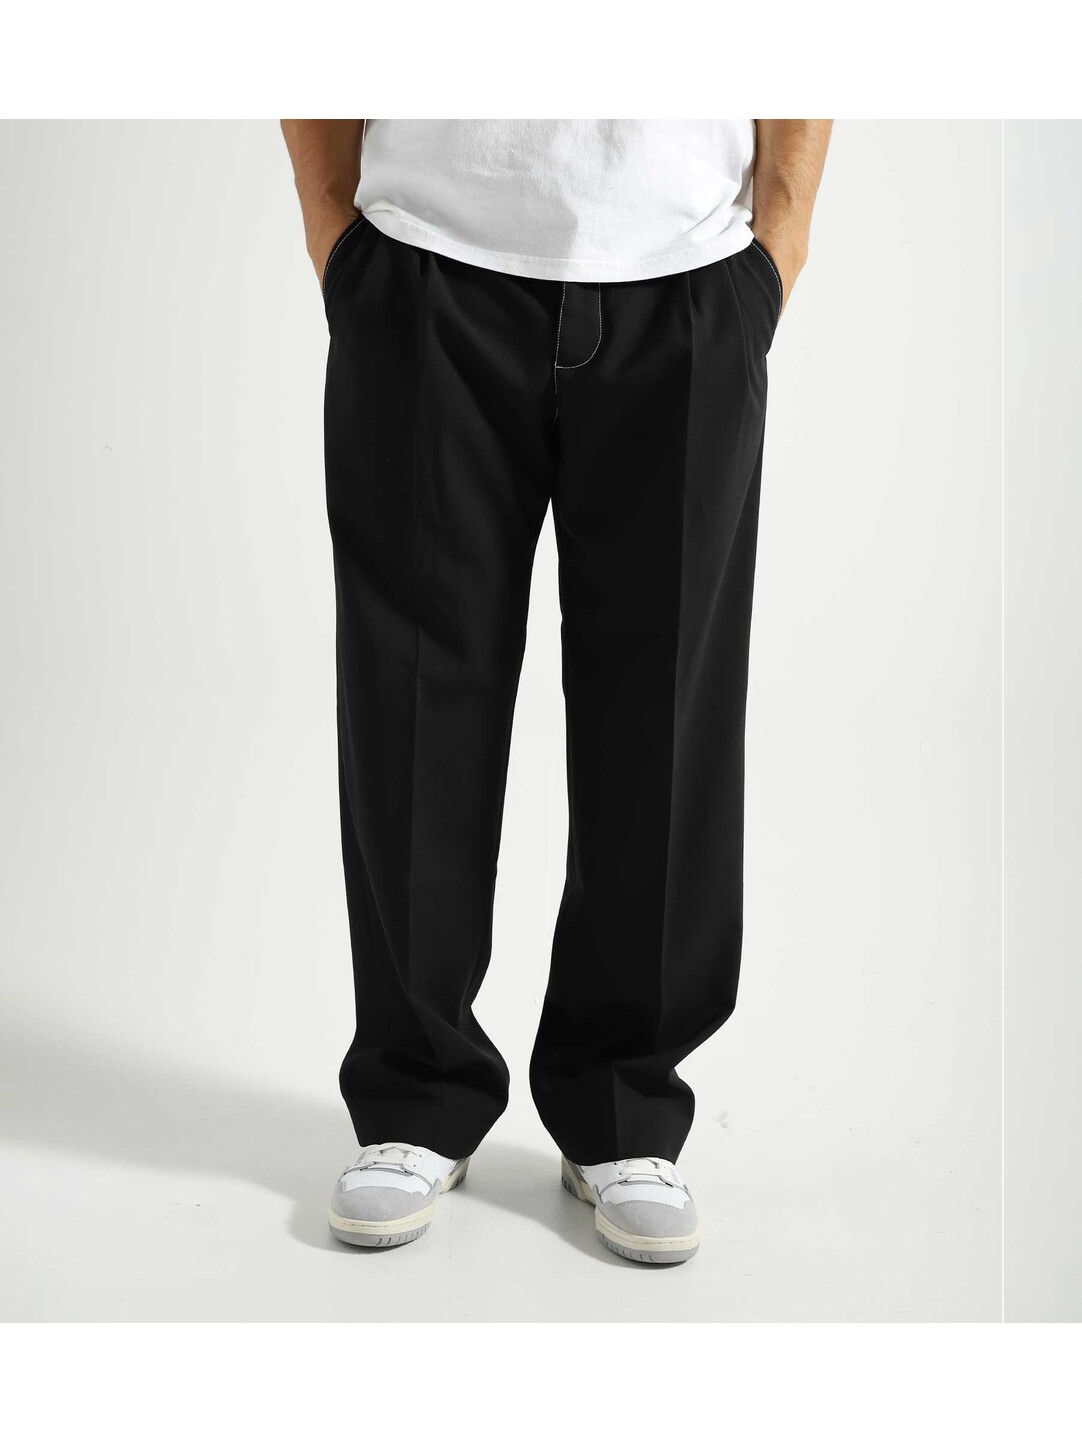 WOOD WOOD Trousers for men - Buy now at Boozt.com